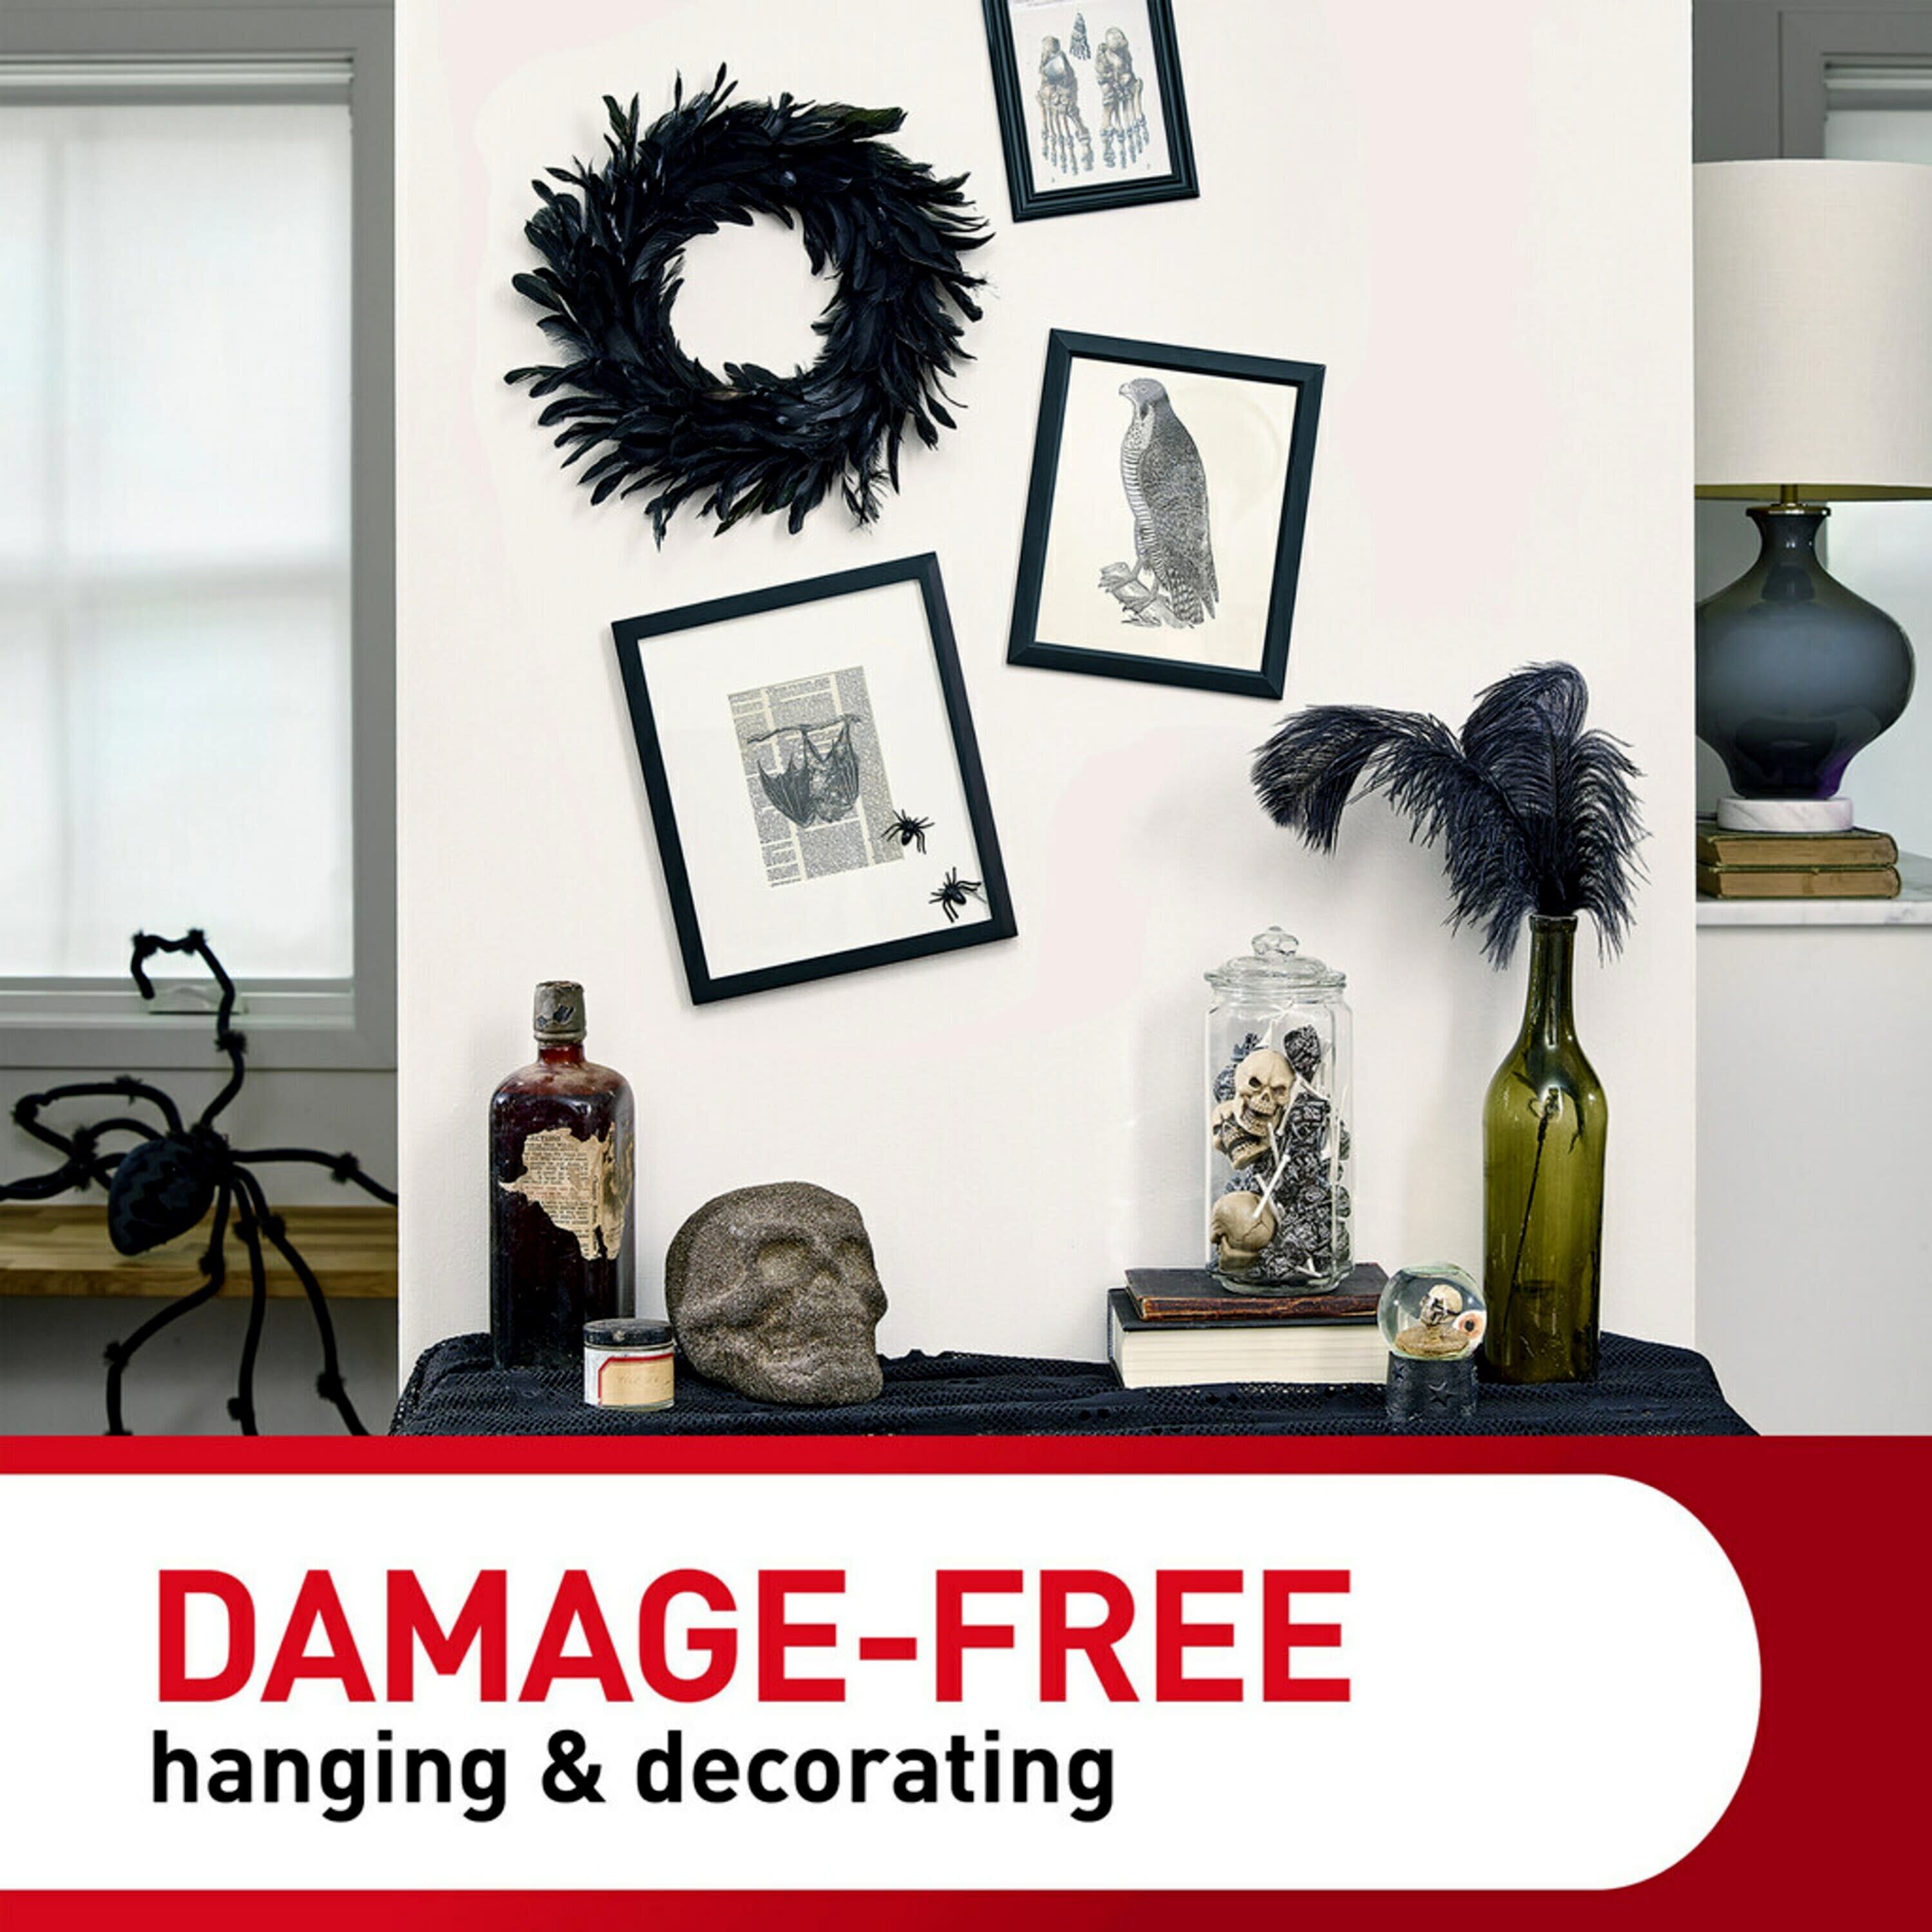 Lumintrail Large Velcro Picture Hanging Strips, Damage Free Hanging Picture Hangers, No Tools Wall Hanging Strips for Living Spaces, 12 Black